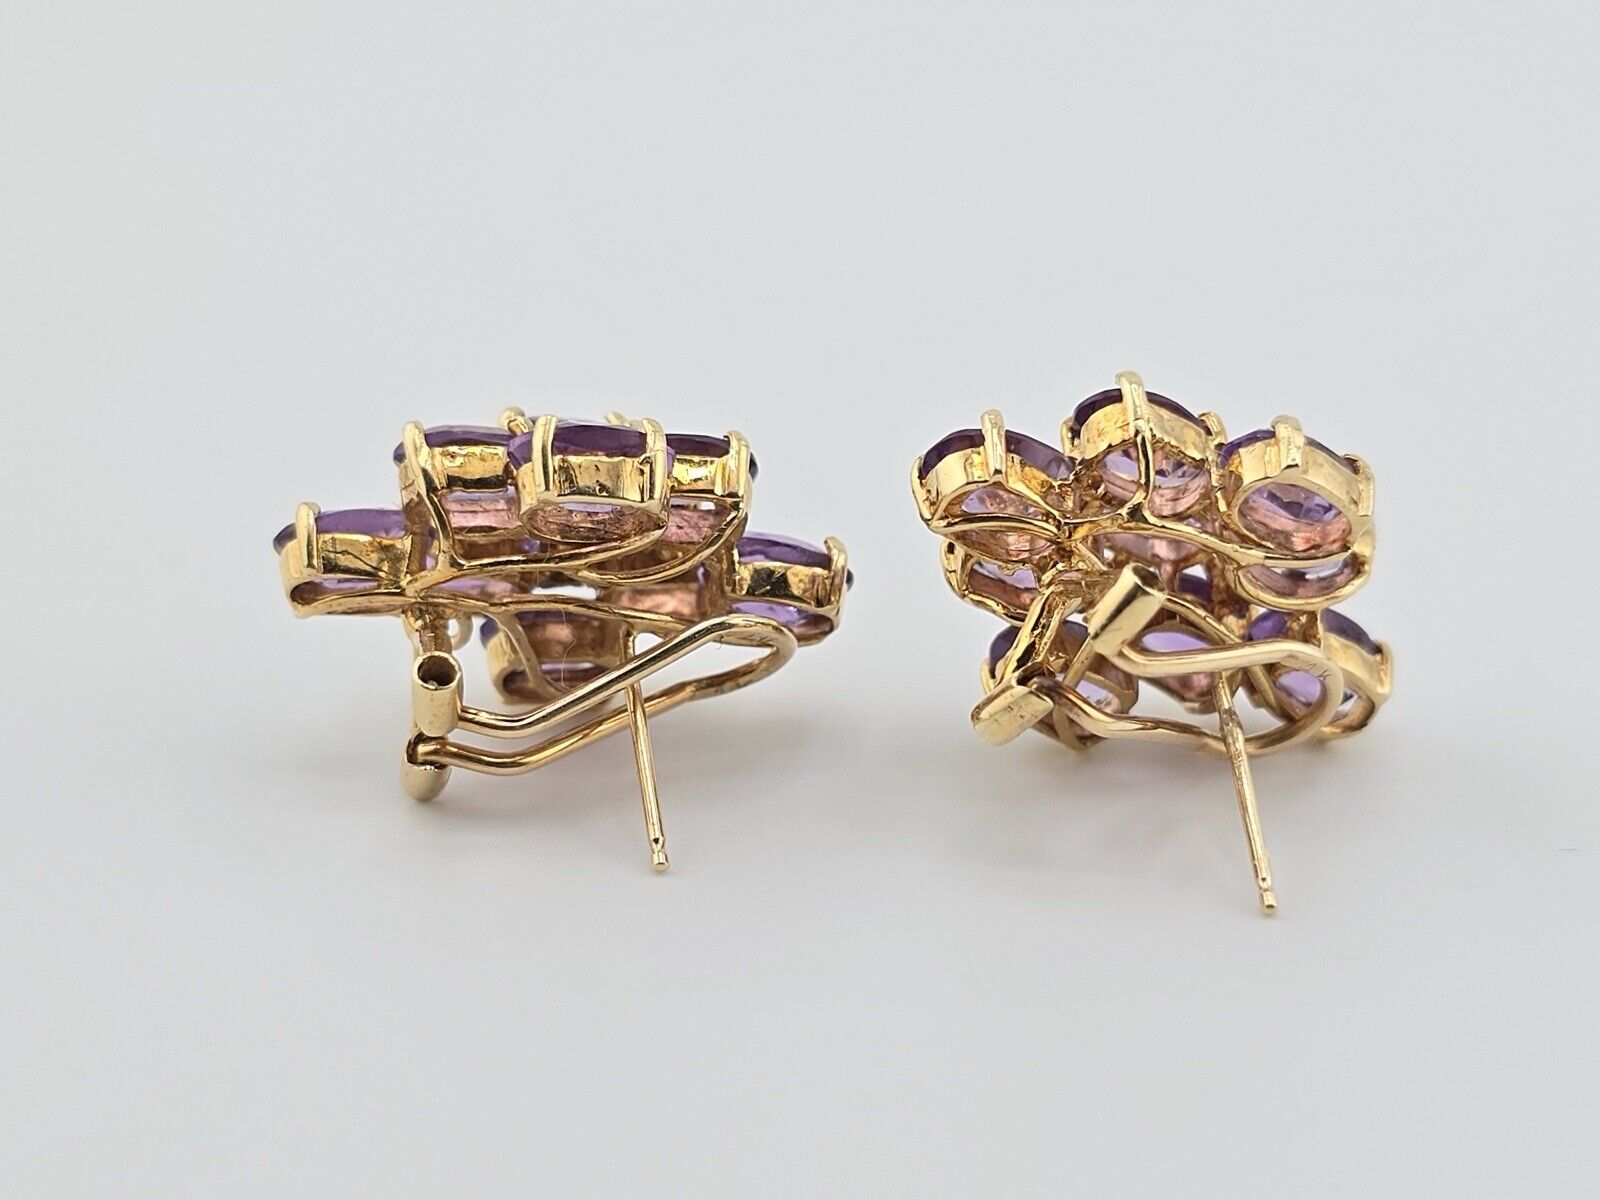 Exceptional 14K Yellow Gold Earrings with Amethyst Omega Clip Backs